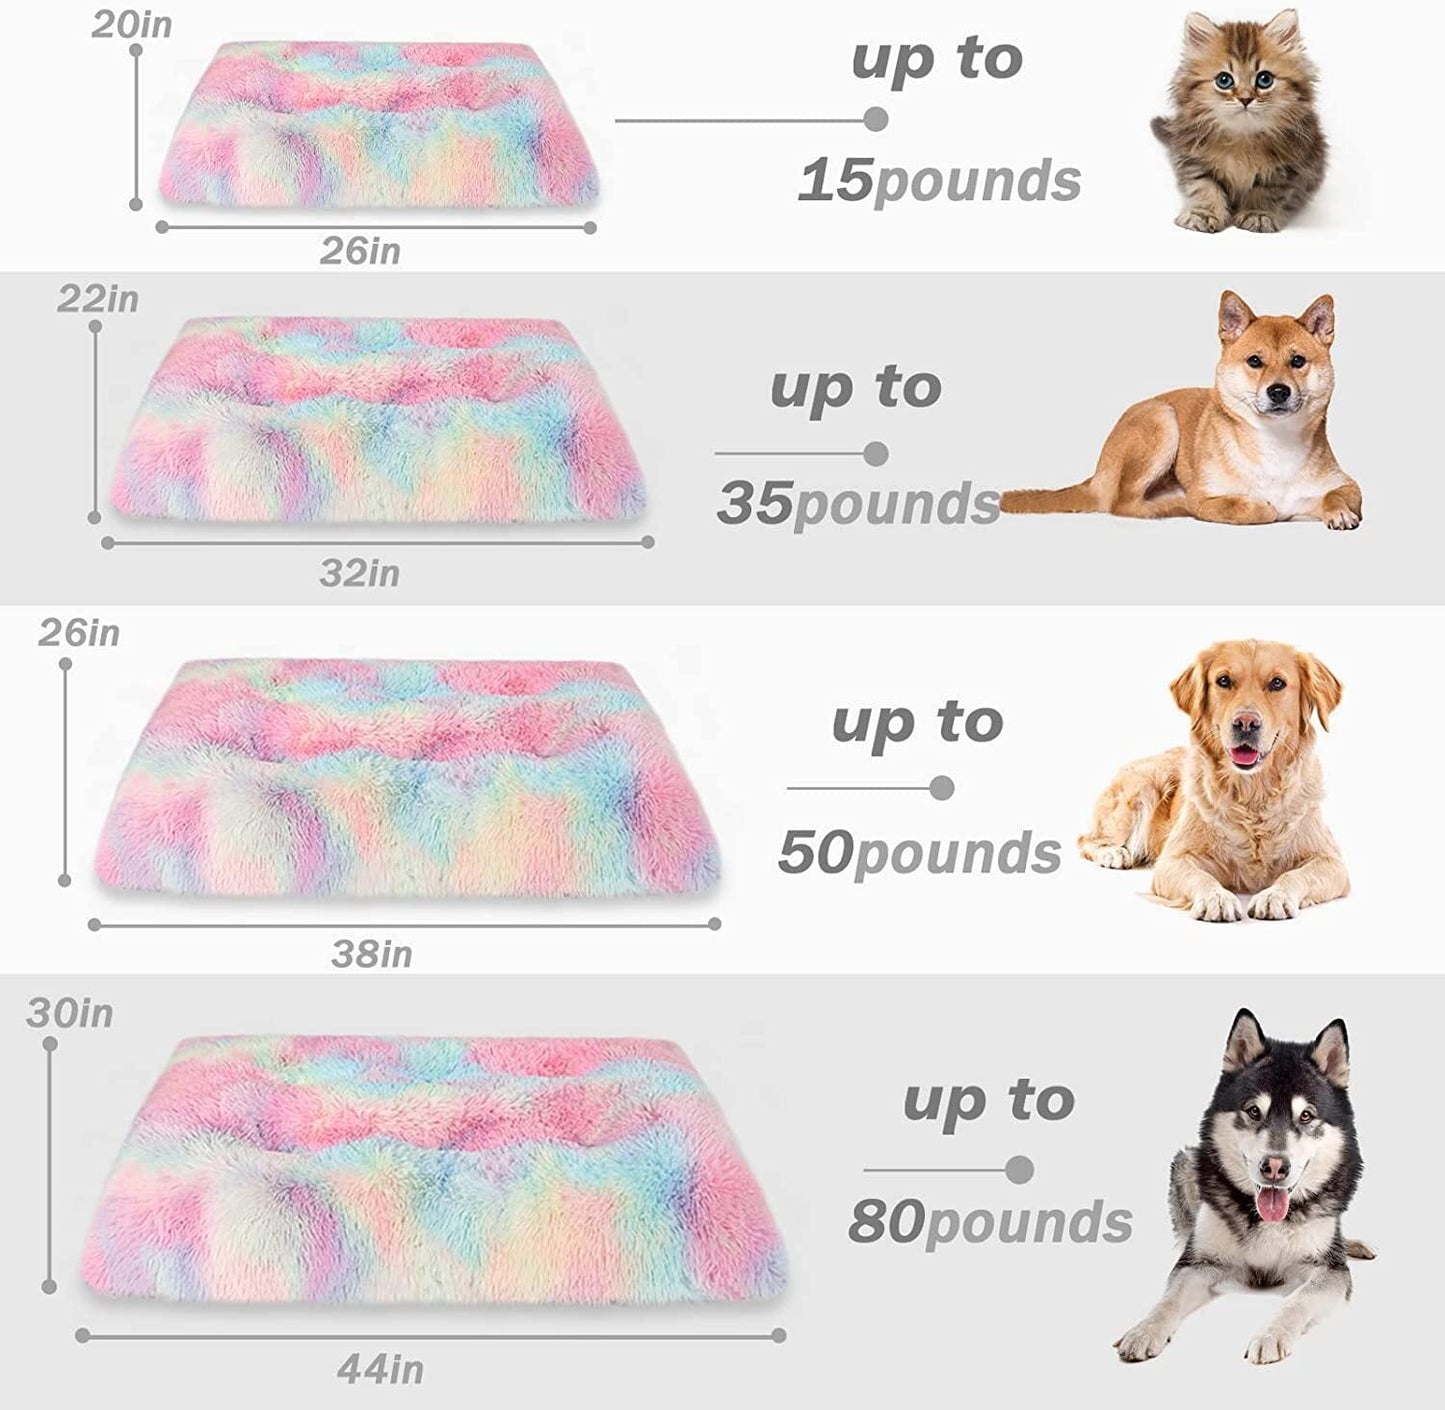 Exclusivo Mecla Soft Plush Dog Bed Crate Mat for Small Dogs (44*30*4 in), Faux Fur Fluffy Dog Pet Cat Kennel Pad with Anti-Slip Bottom, Machine Washable Rainbow